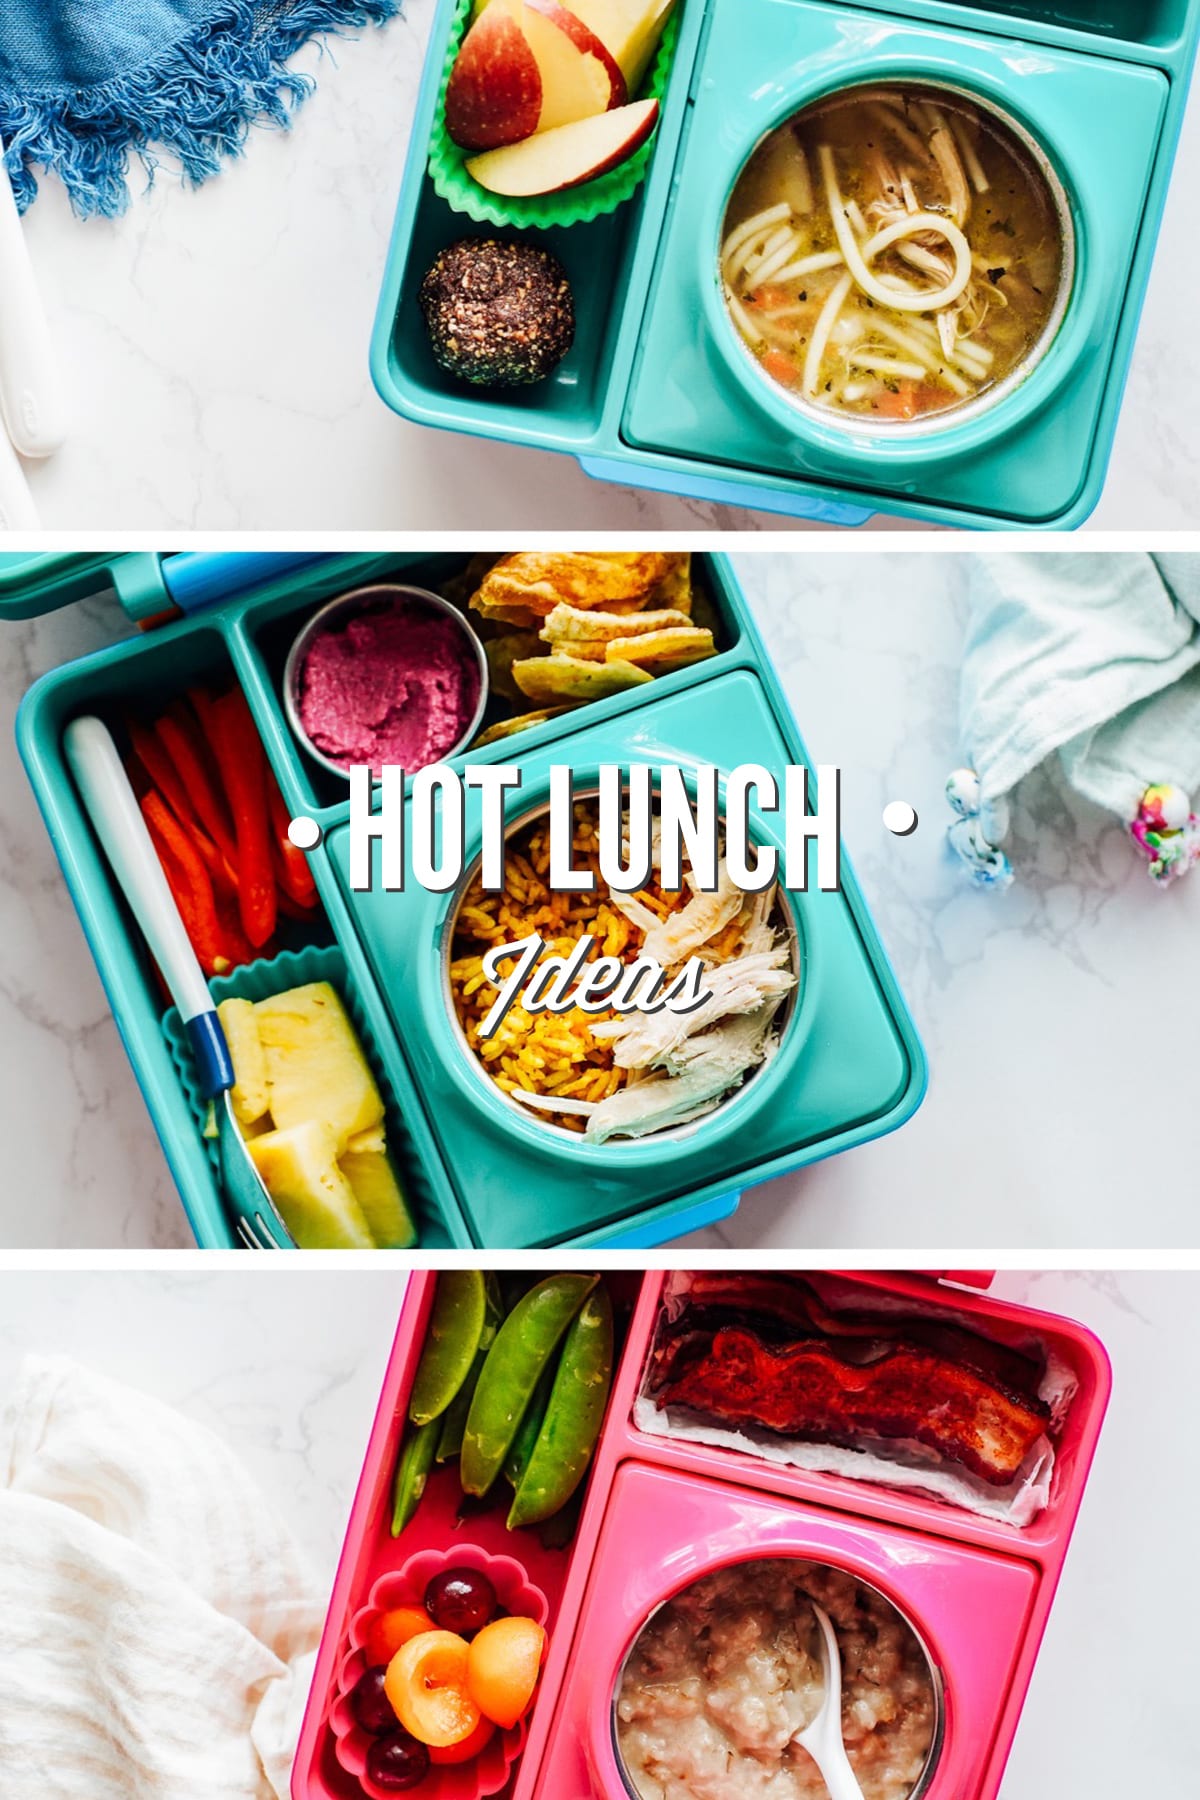 22 Hot Lunch Ideas for School (Easy and Healthy)